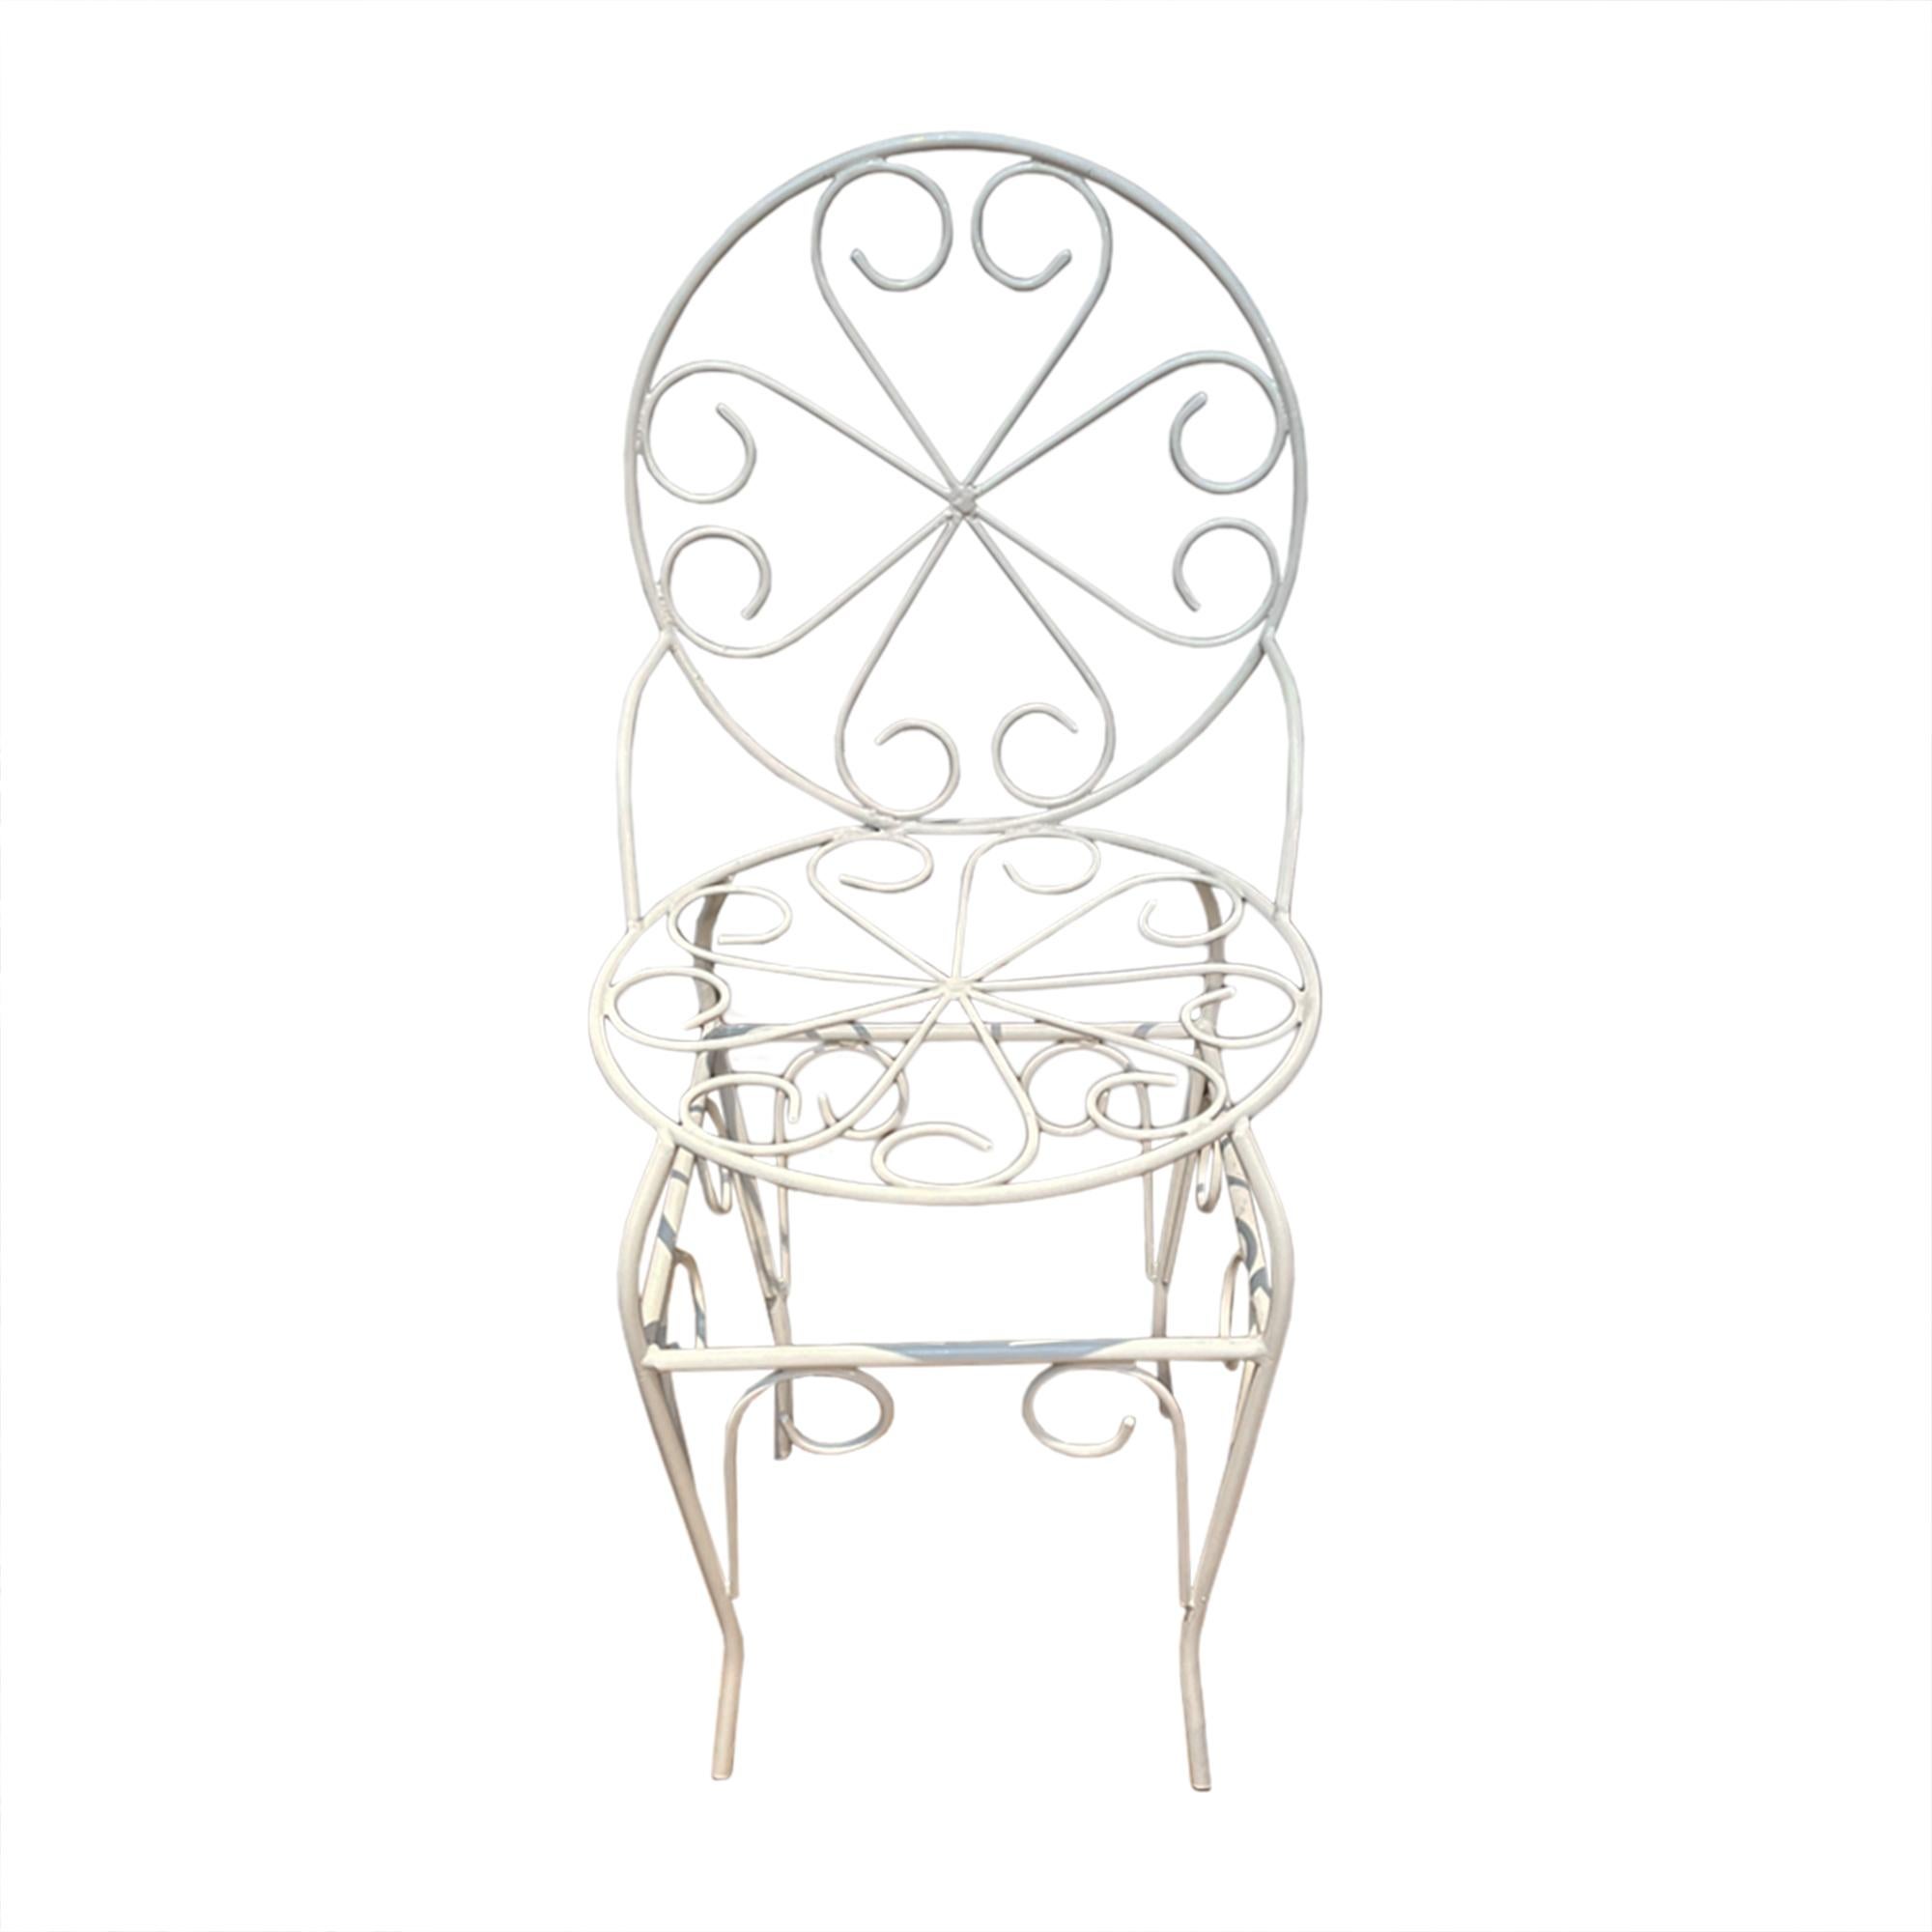 These very attractive garden chairs were made in France in the 1950s.

Crafted from wrought iron with a lovely swirling design. We have had all the chairs fully restored - each one has been shot blasted and re powder coated. Great quality and now